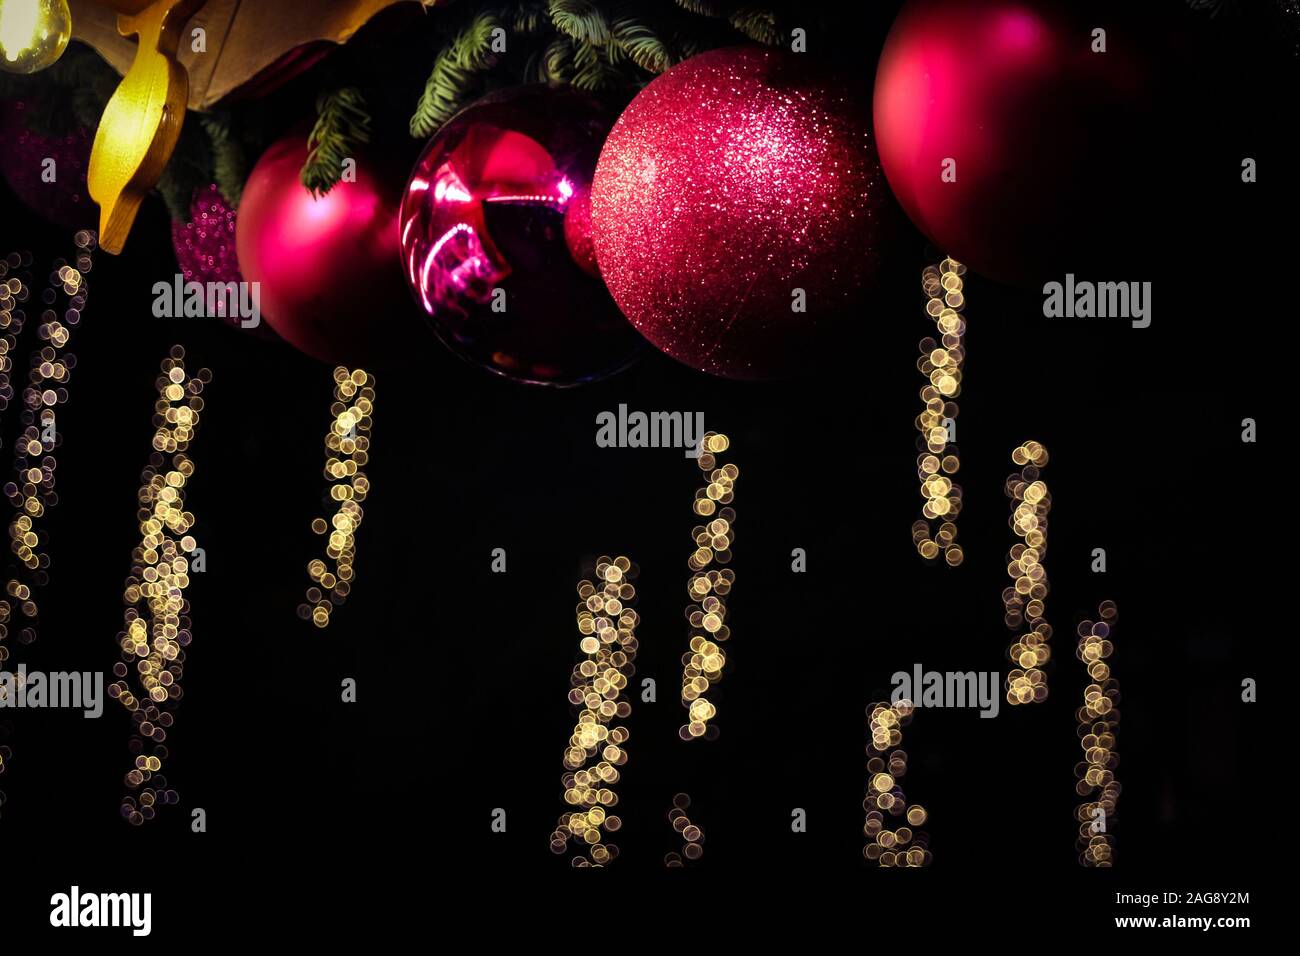 Red christmas ornaments and bokeh festive lights in the background, seen at Weimar christmas market, Germany. Stock Photo